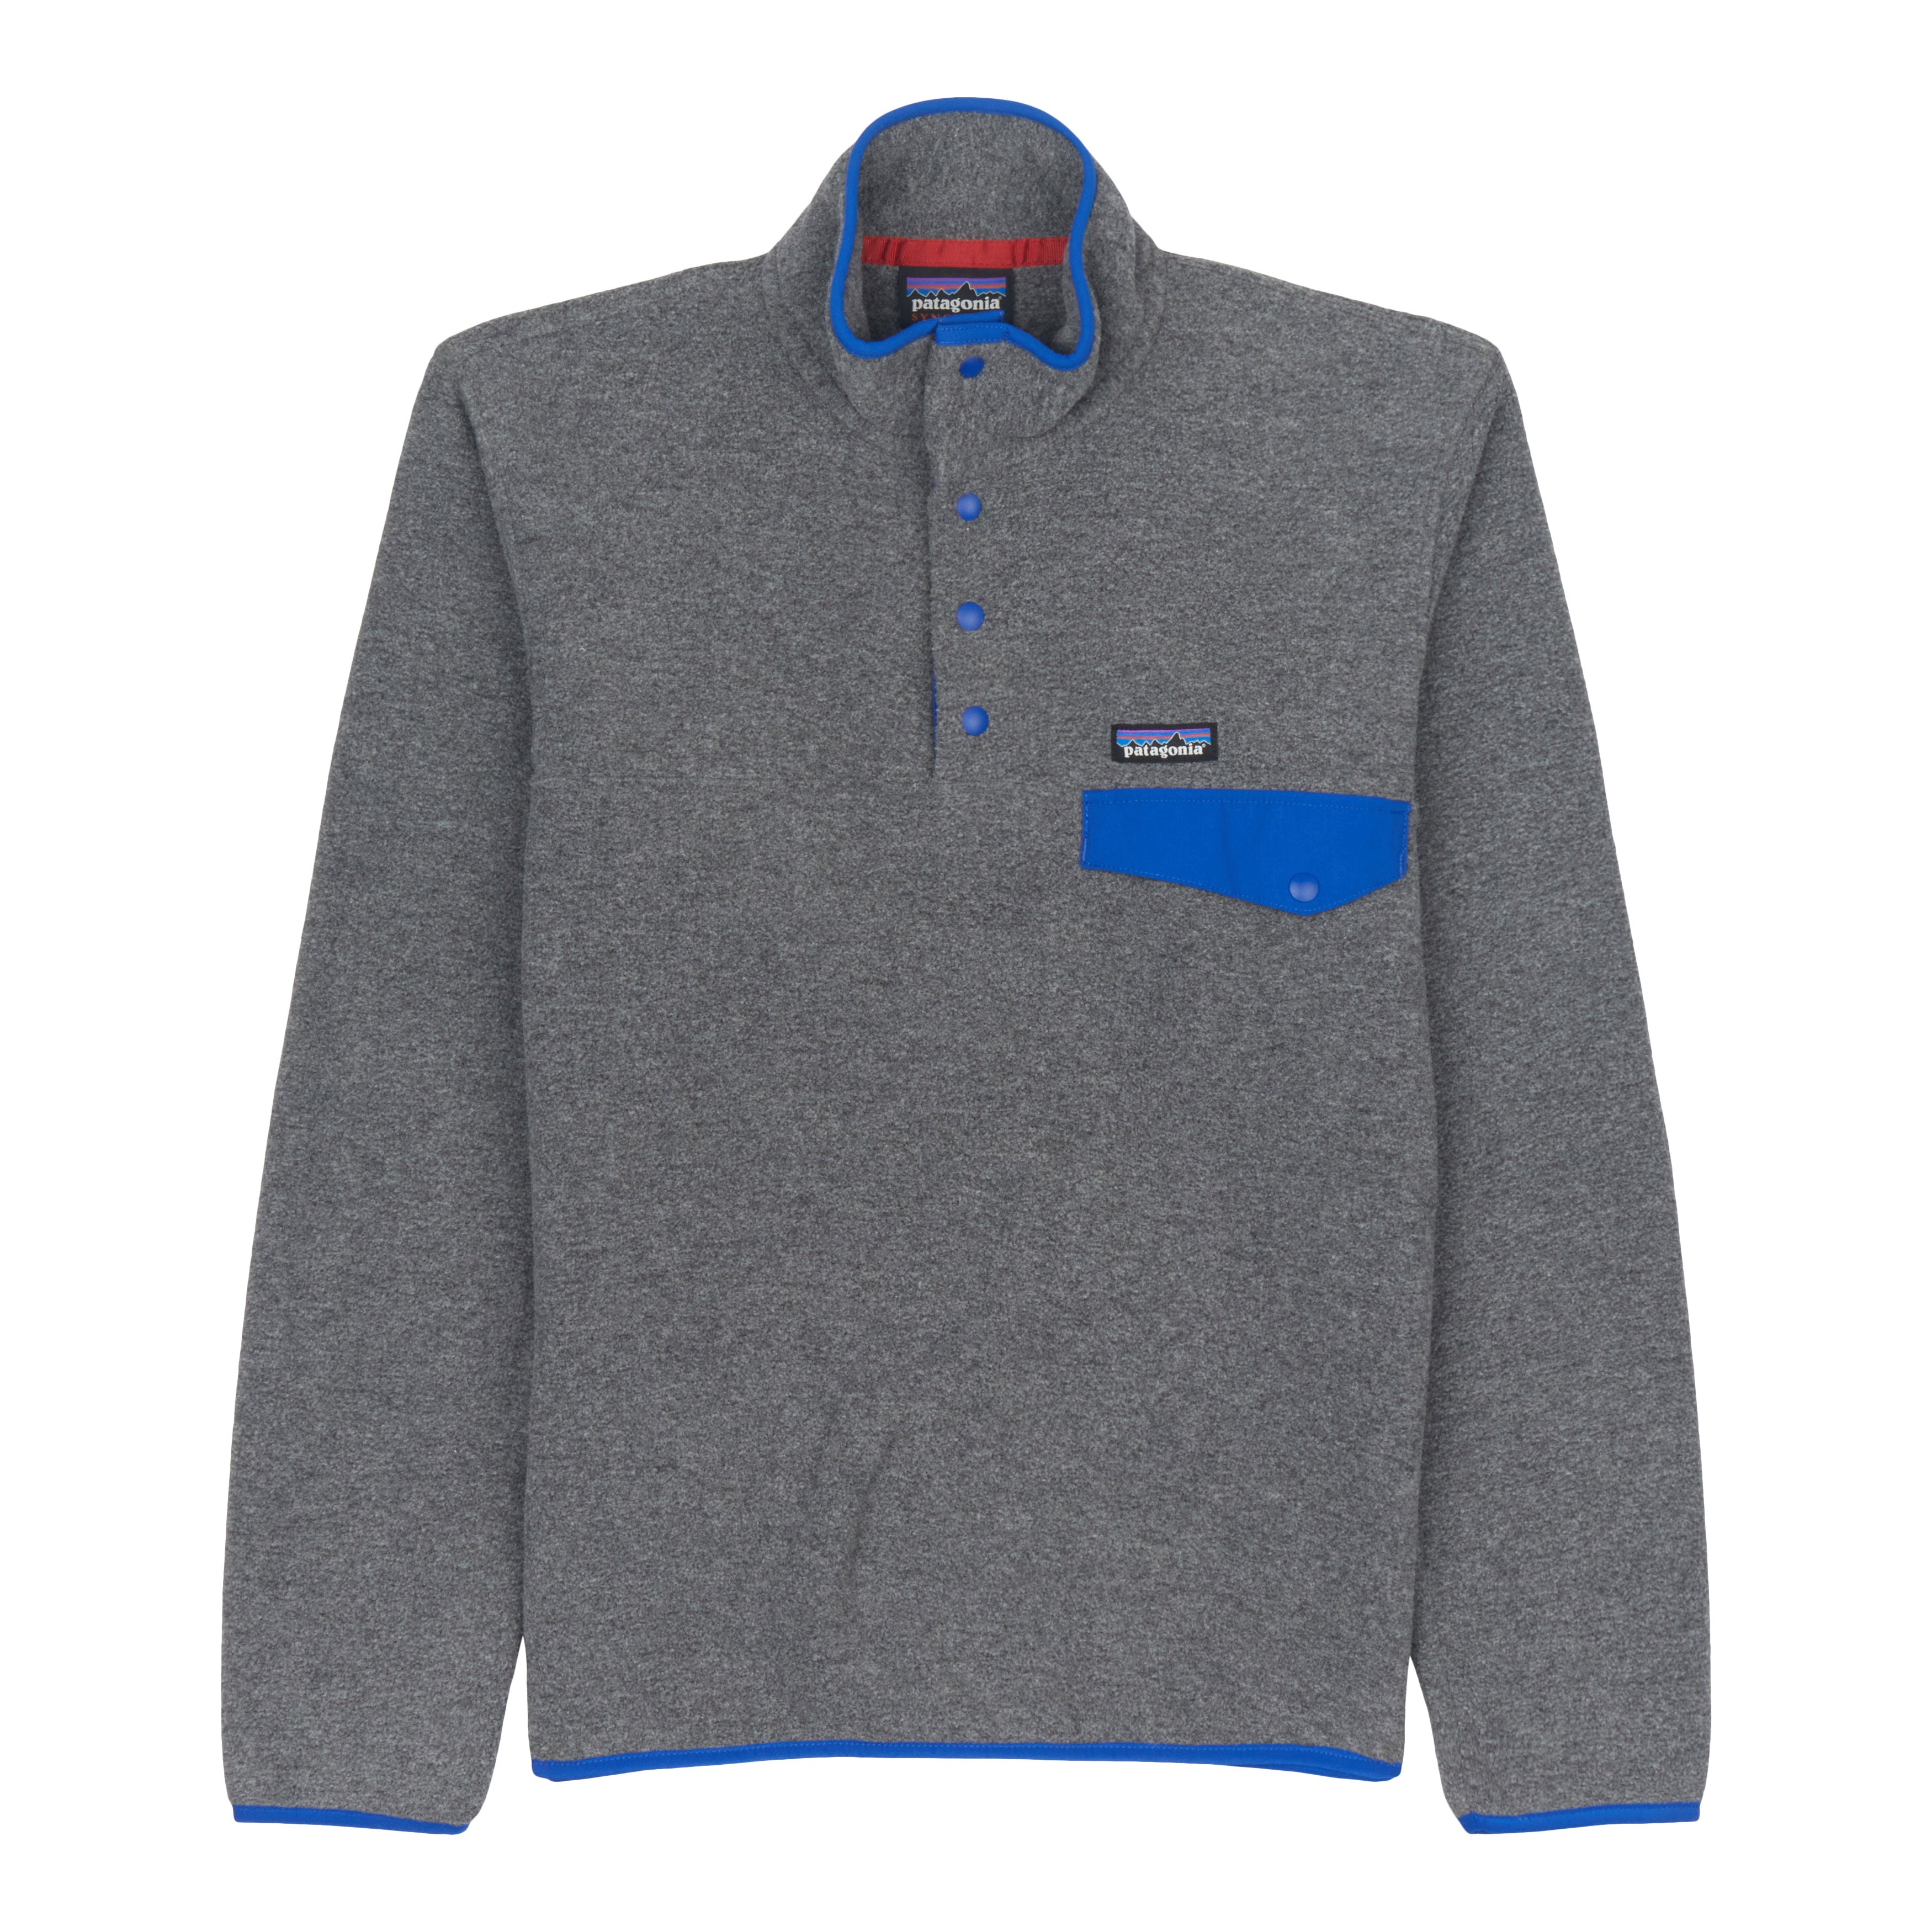 T Fleece Pullover – buy now at Infrastructure-intelligenceShops Online  Store! - Patagonia Lightweight Synchilla Snap - La paire sera accompagnée  dun t-shirt en édition limitée ainsi quun hoody